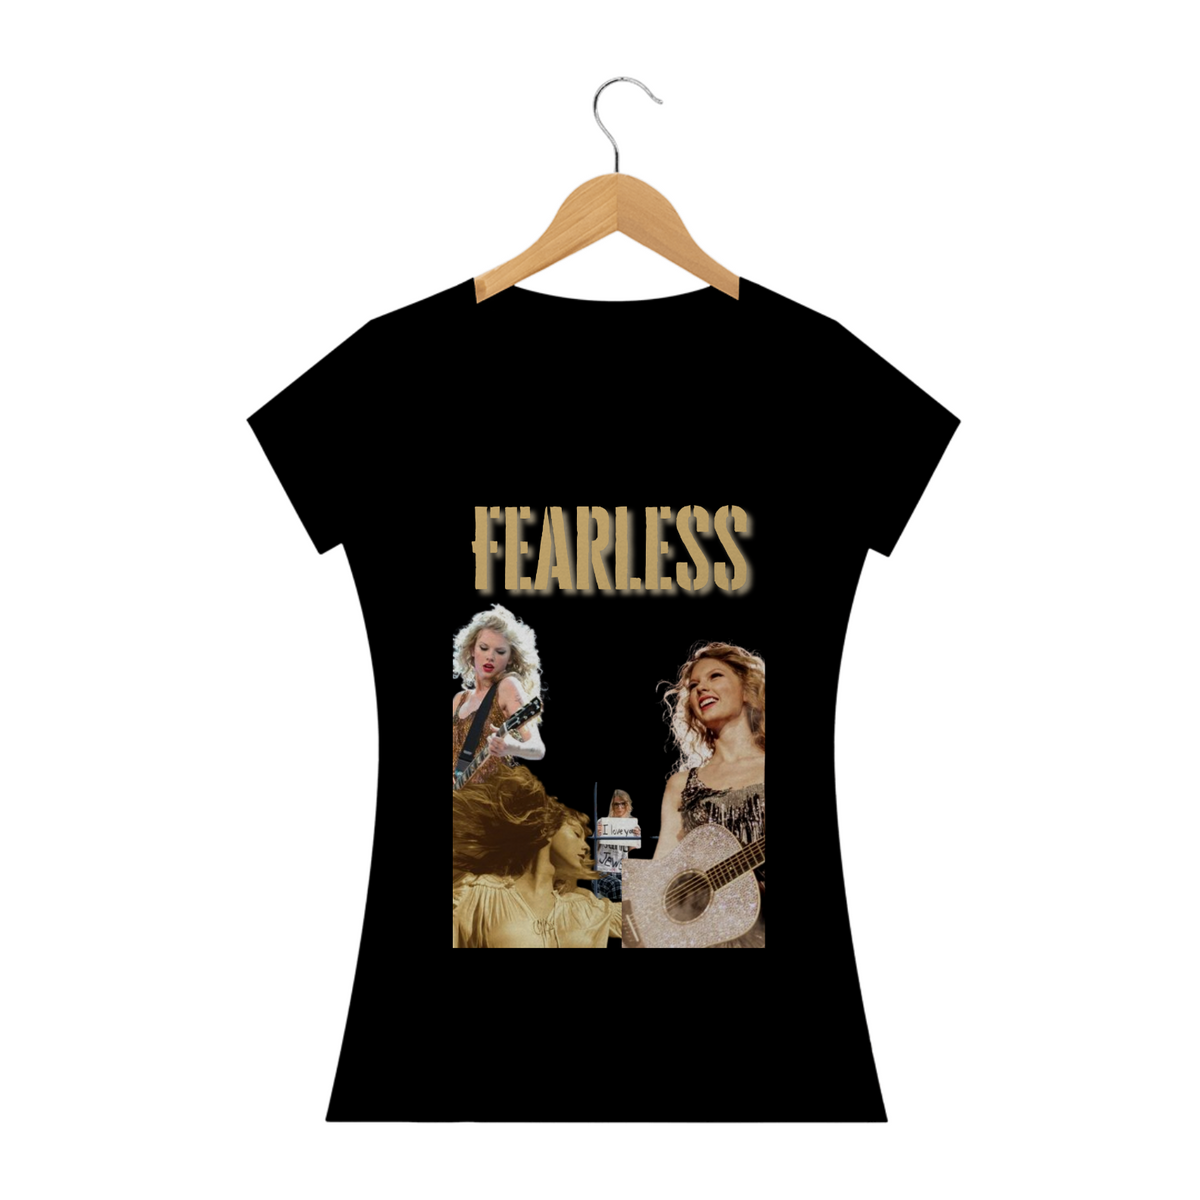 Nome do produto: taylor swift fearless baby tee